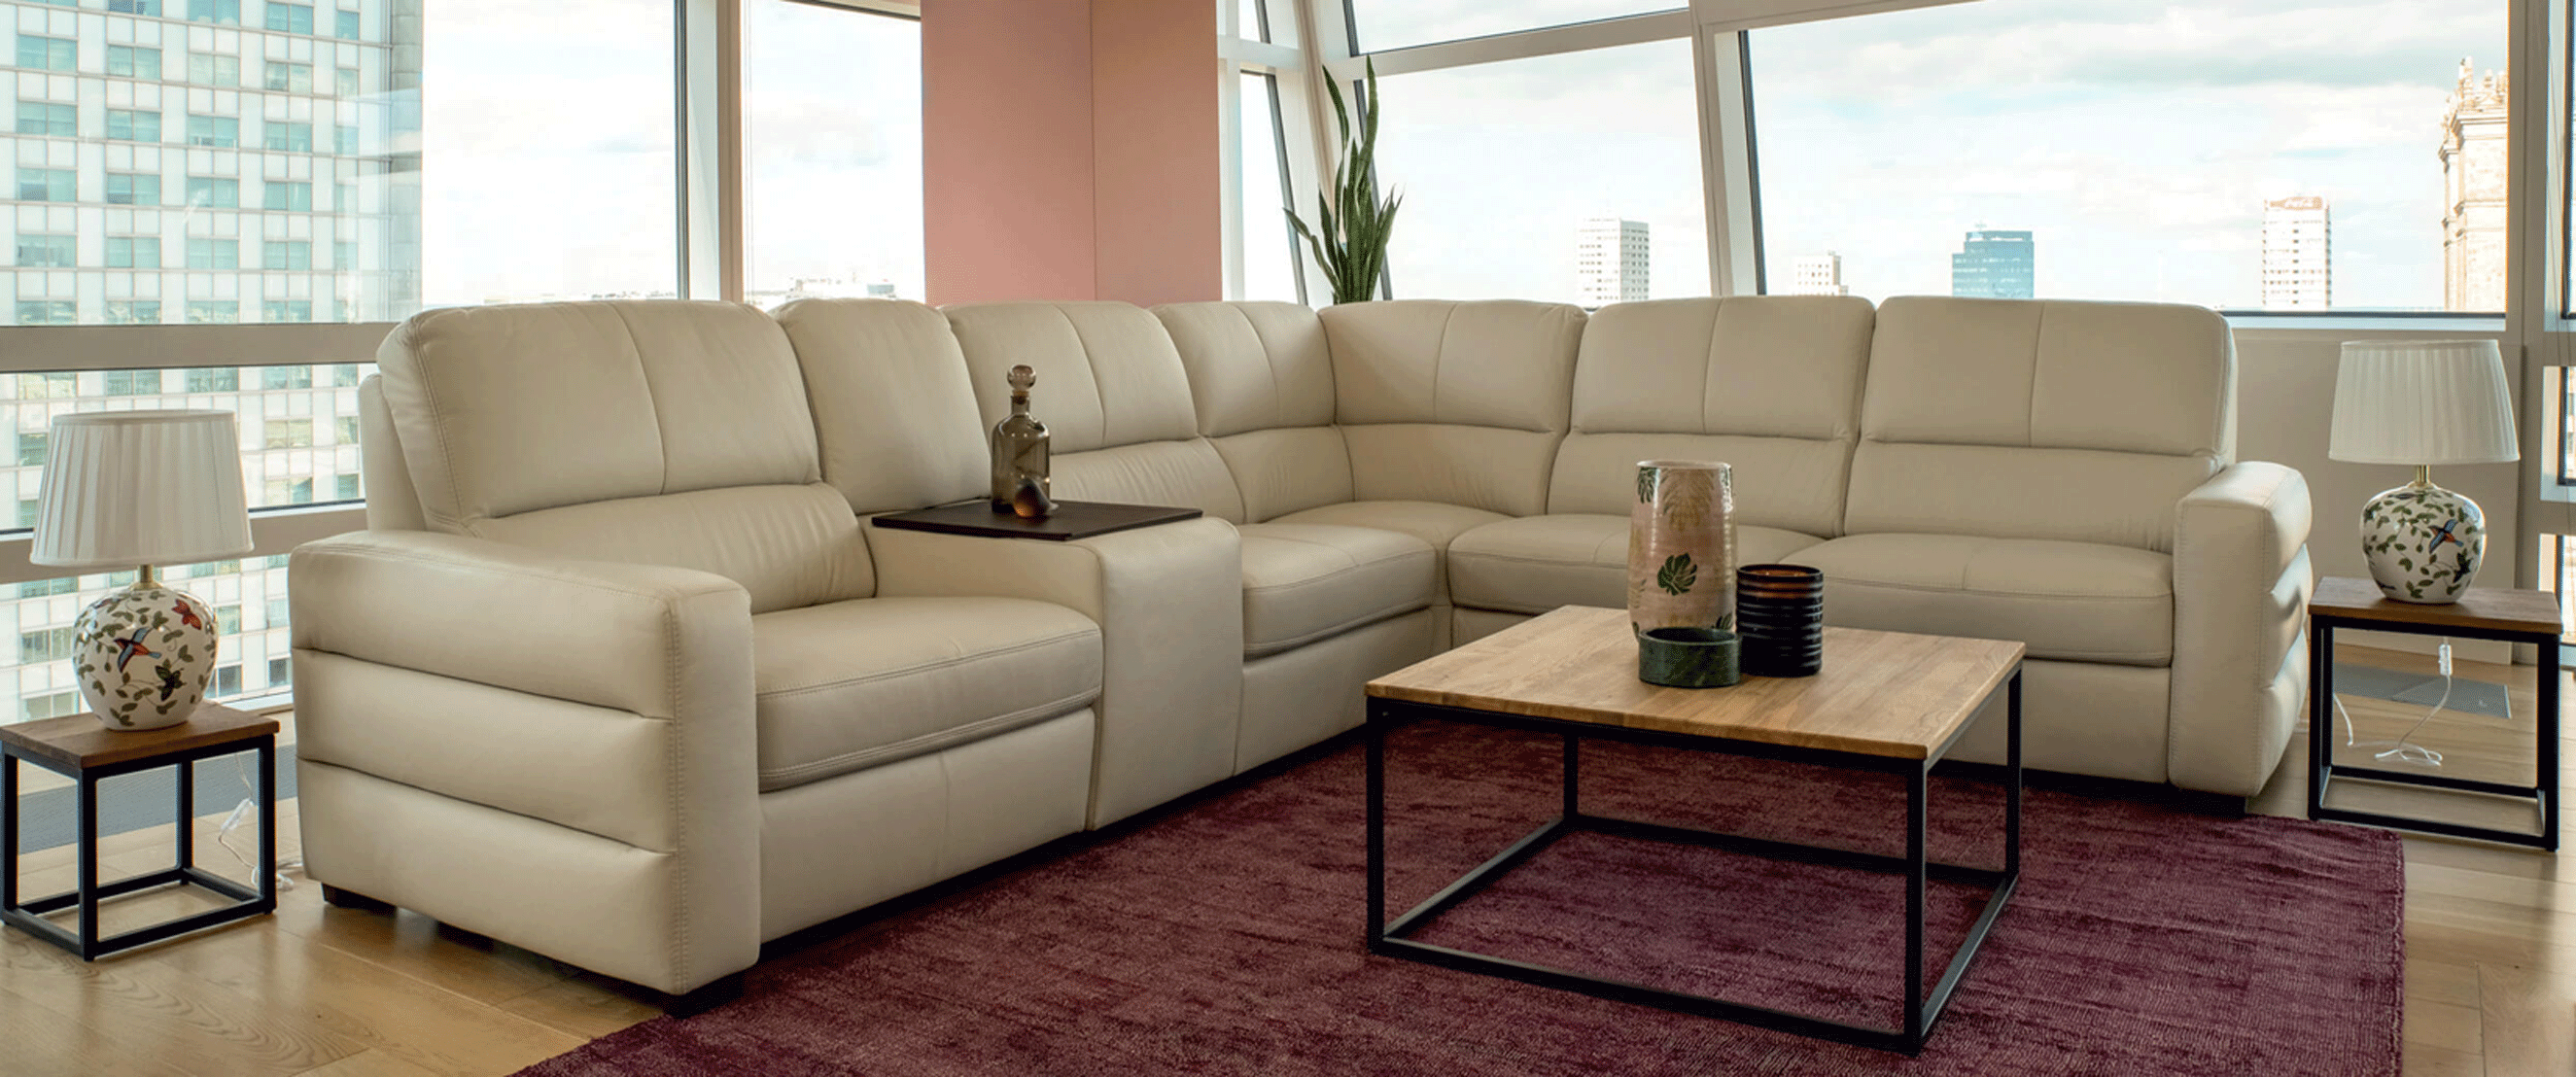 Living Room Furniture Reclining and Sliding Seats Sets Karten Sectional